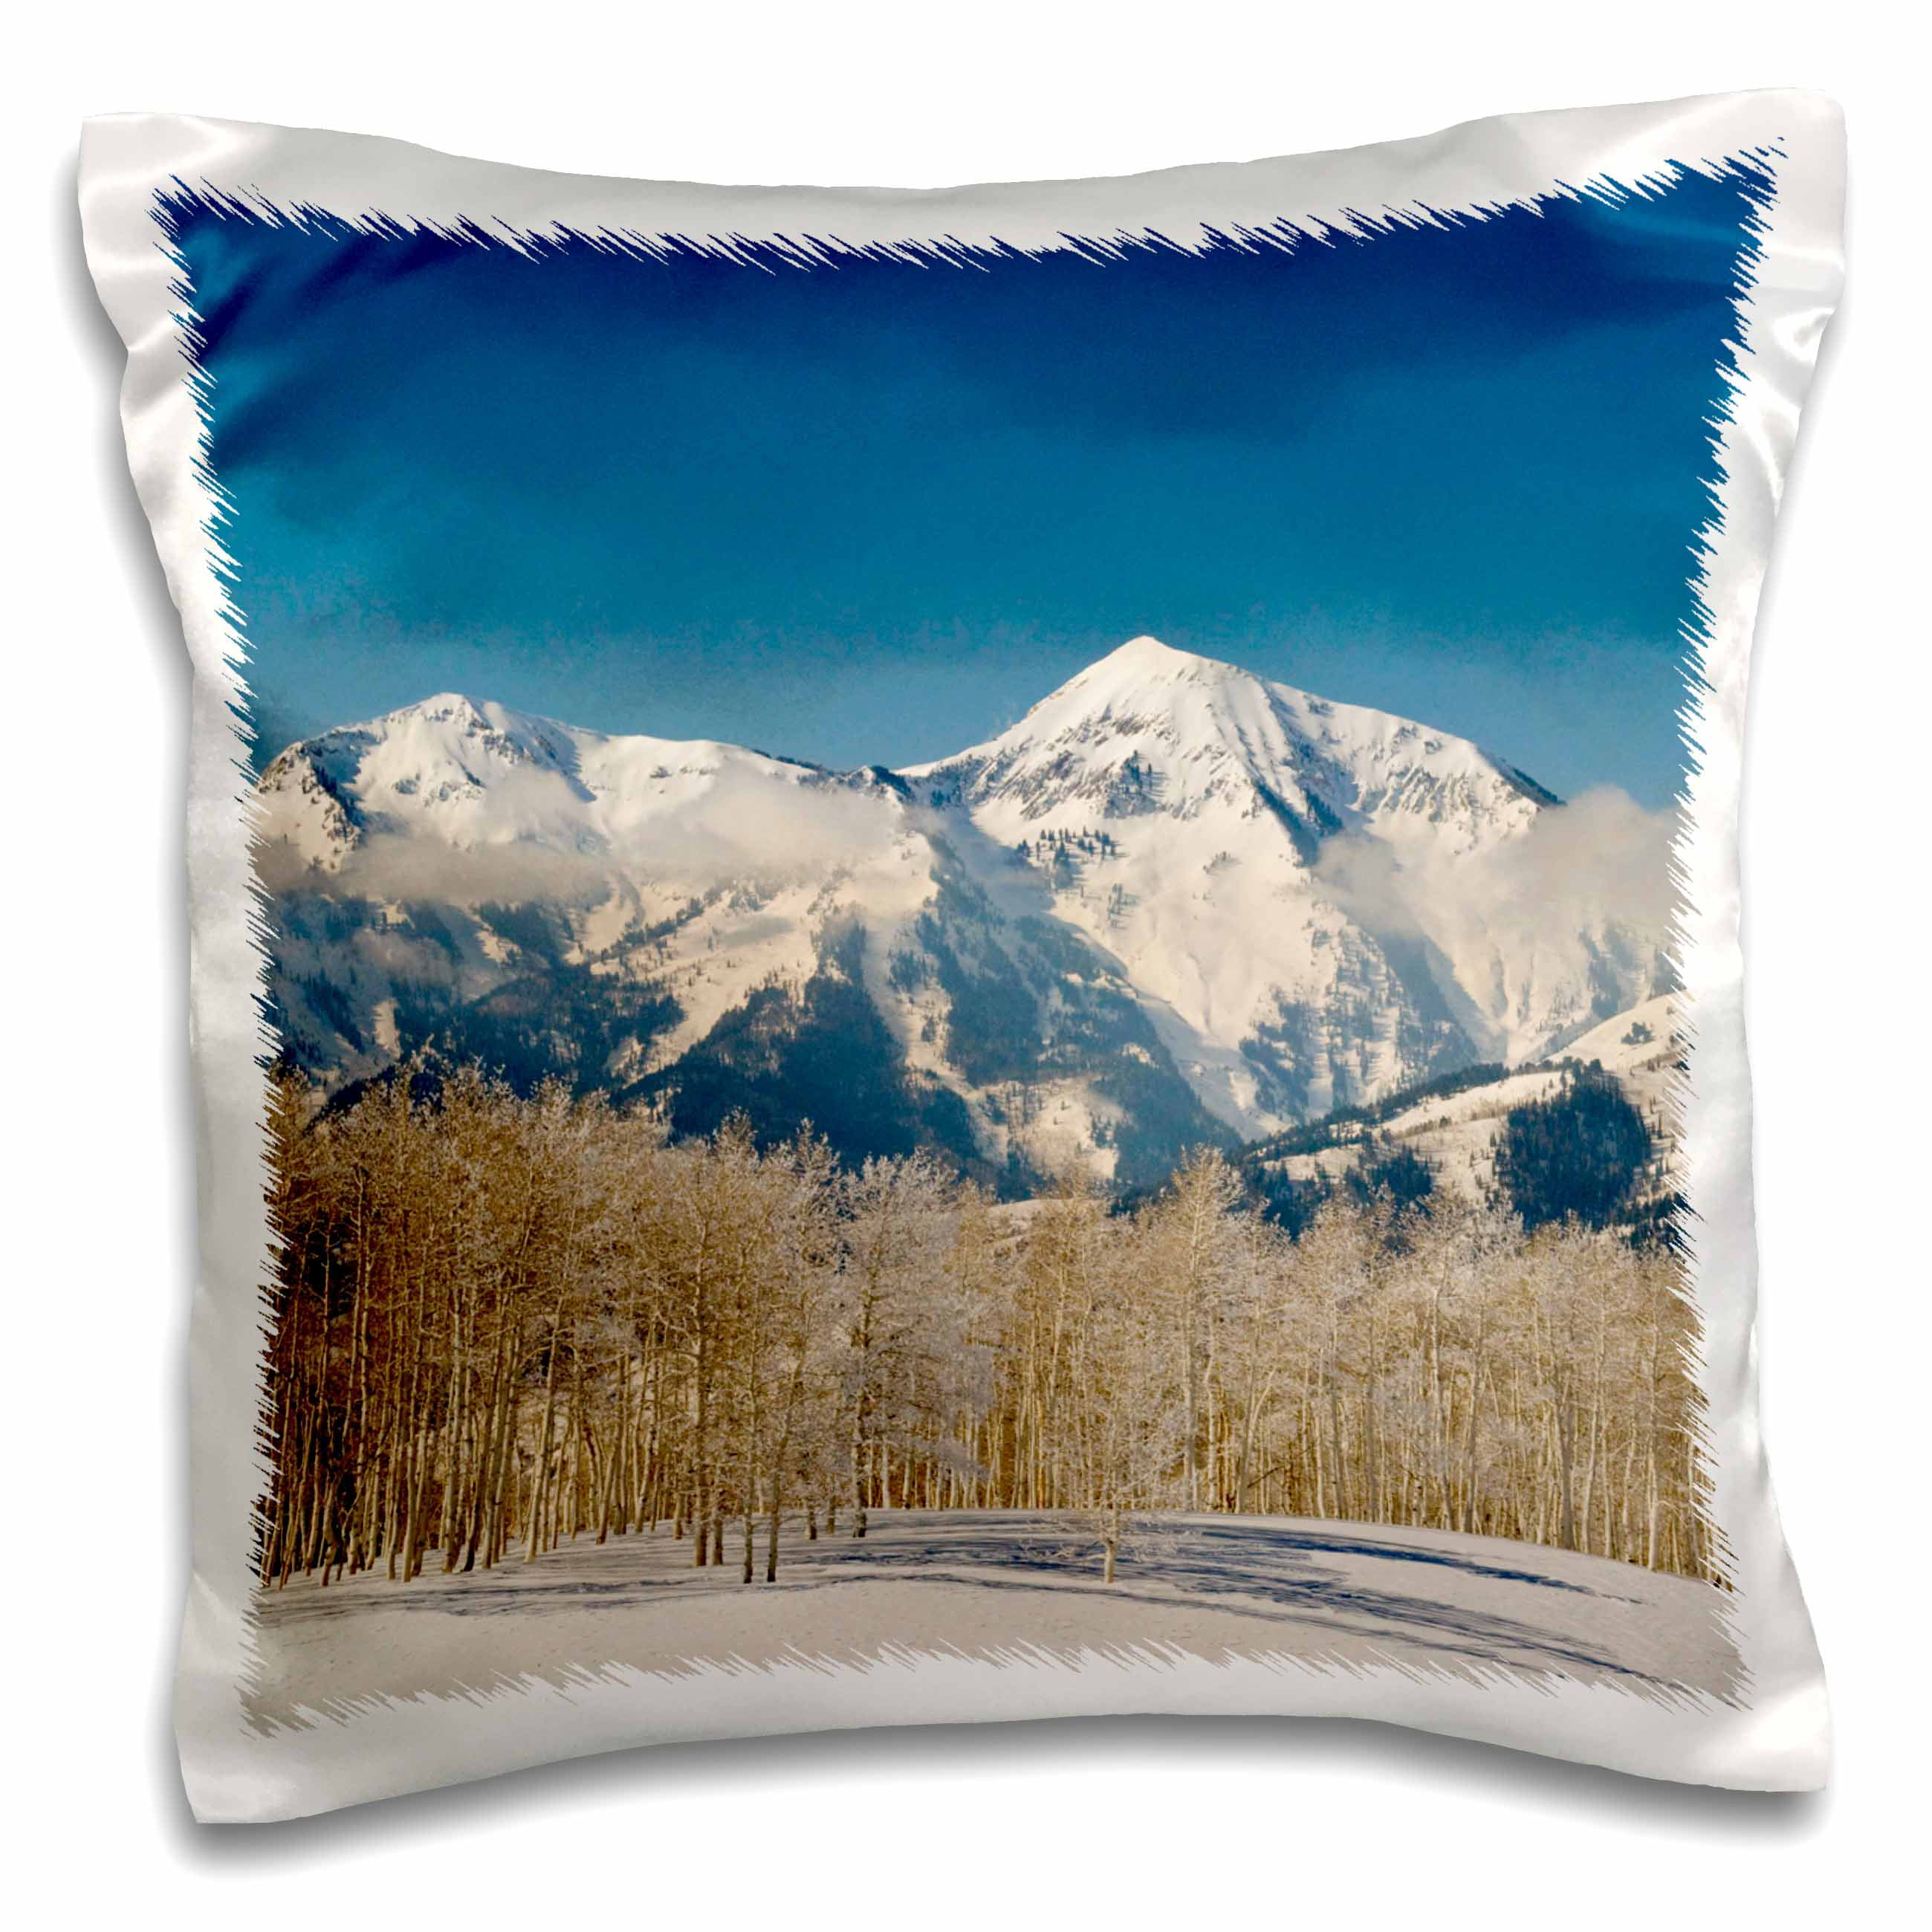 pc_147316_1 Wasatch Mountains Utah Mt Nebo USA-Us45 Hga0426-Howie Garber-Pillow Case 3dRose Quaking Aspen 16 by 16